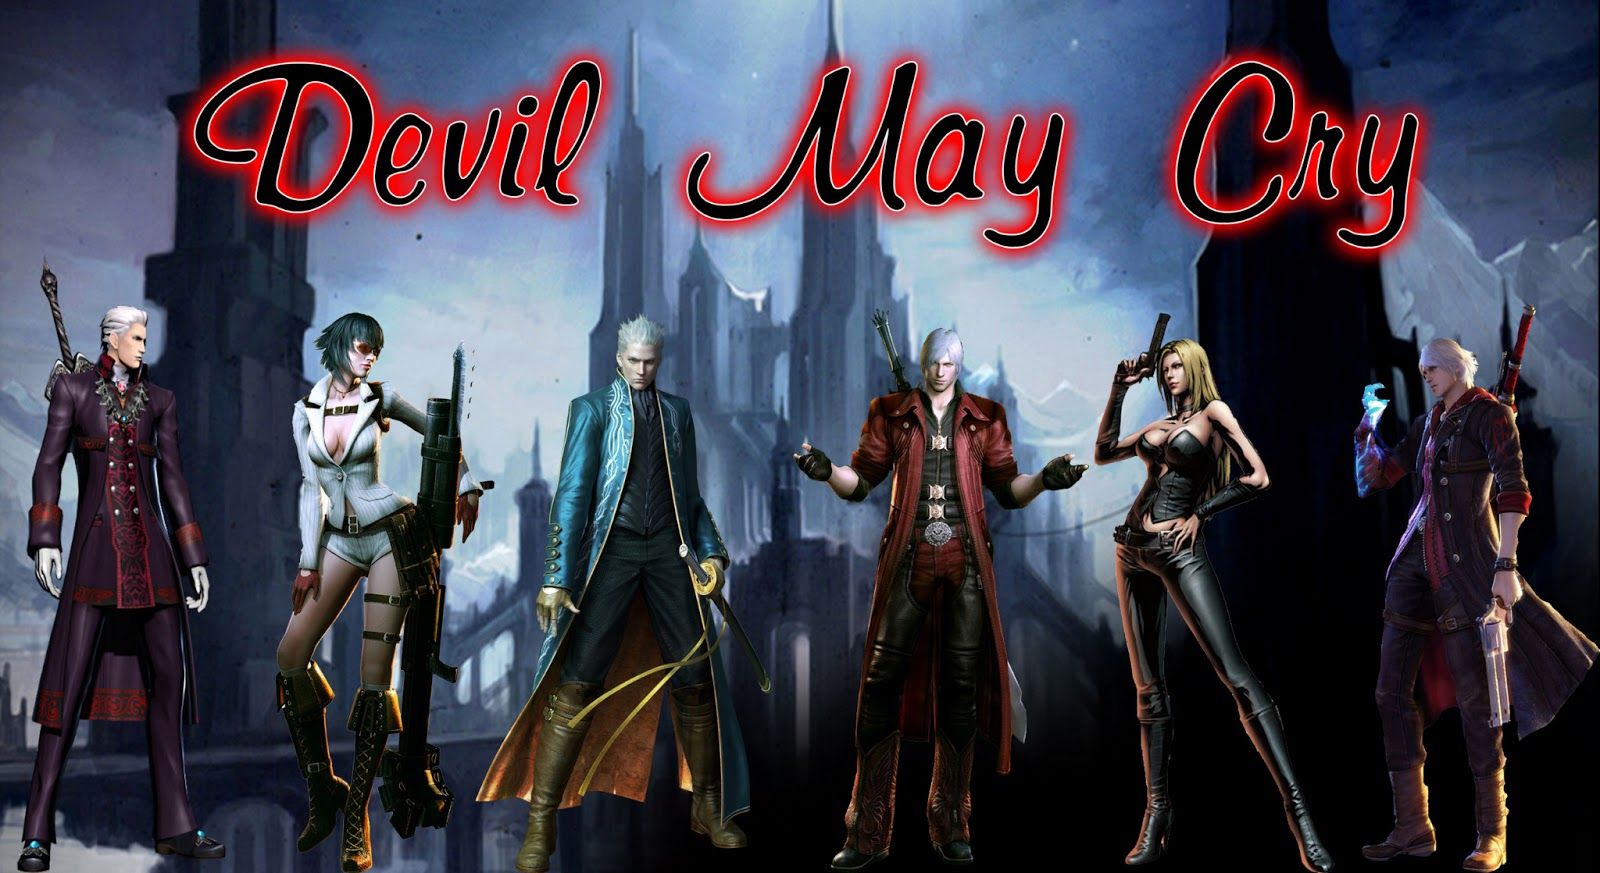 Devil may cry 4 apk + data download